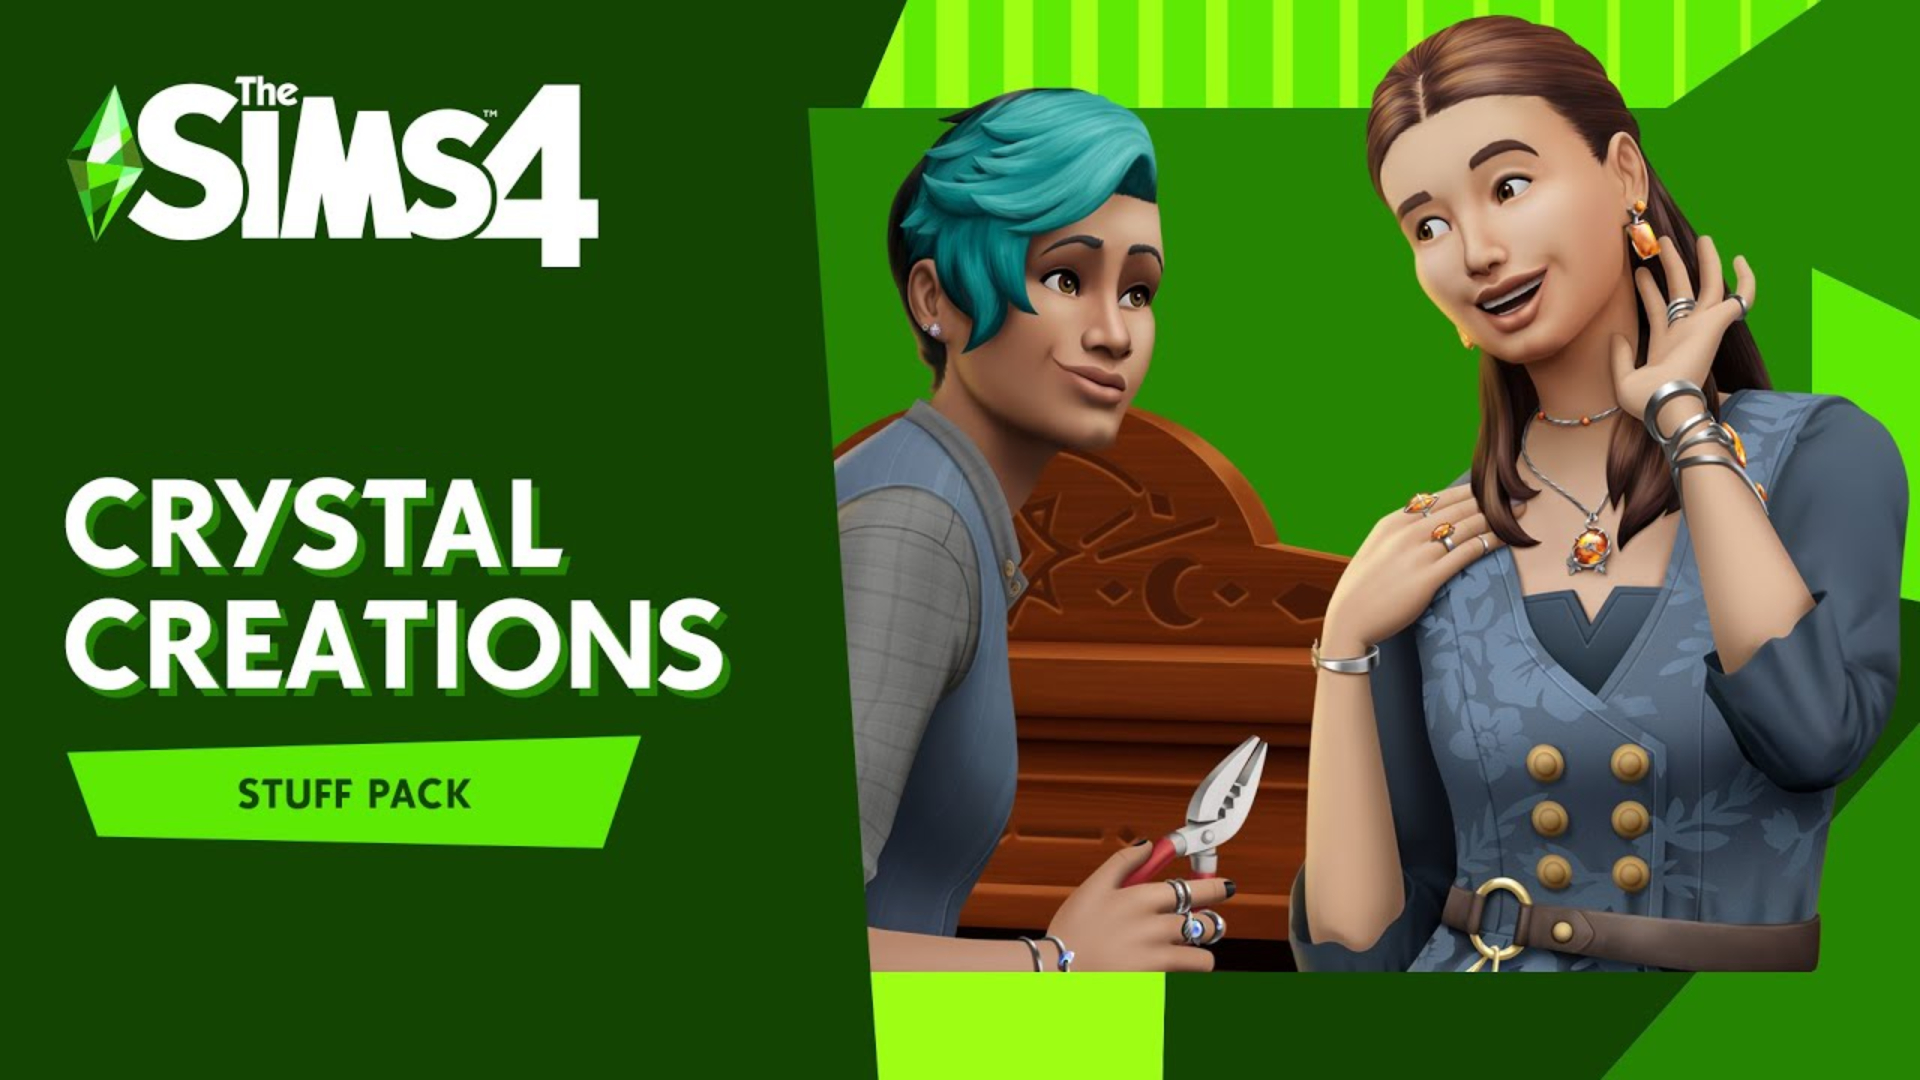 The Sims 4 Reveals Their Newest Stuff Pack – Available February 30